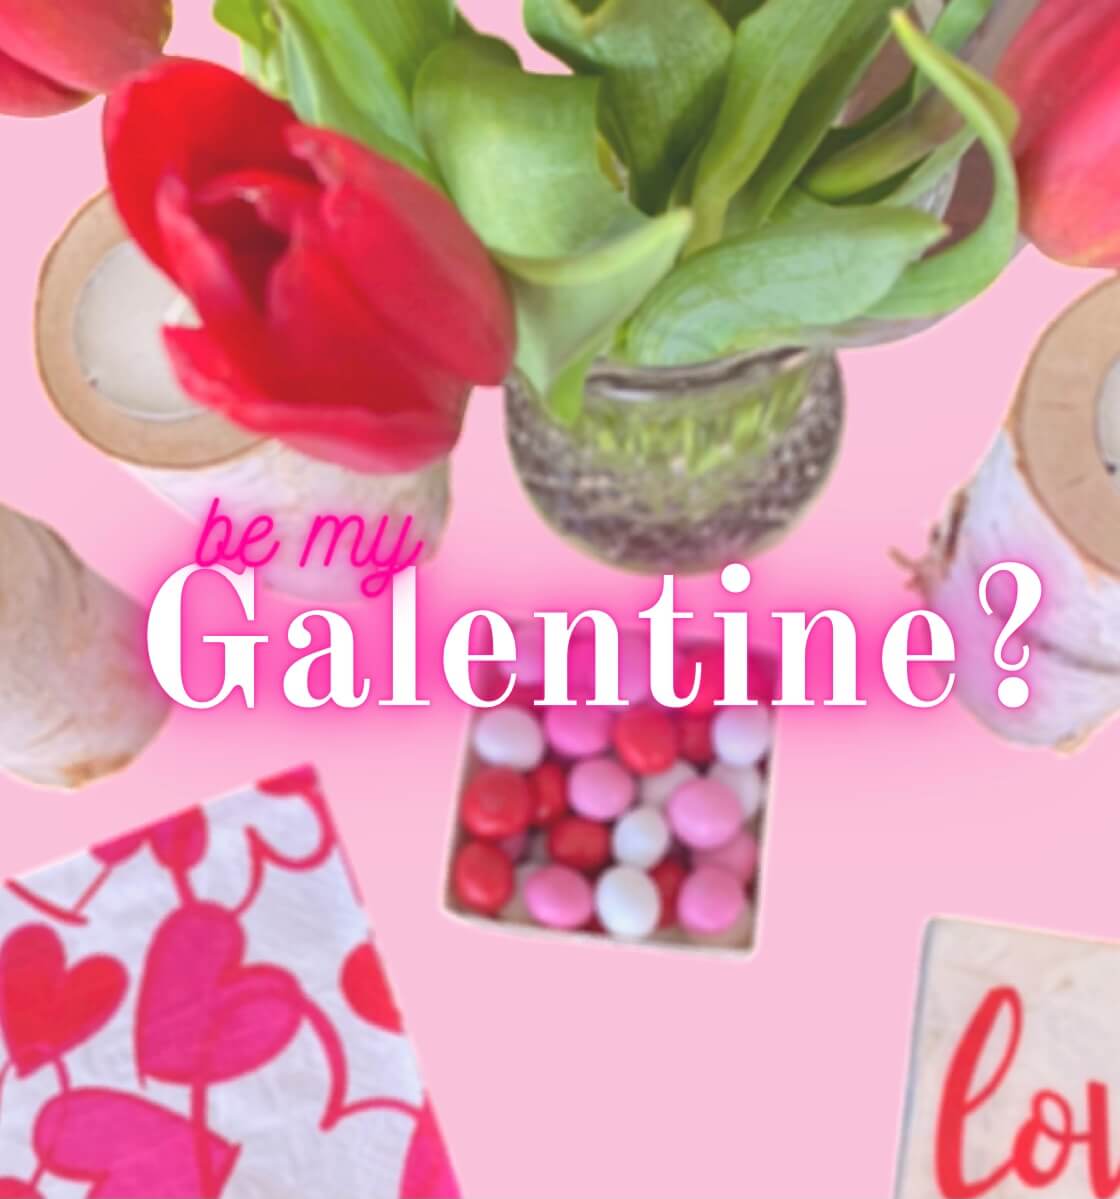 Image of valentines day decor with a be my galentine written in word art